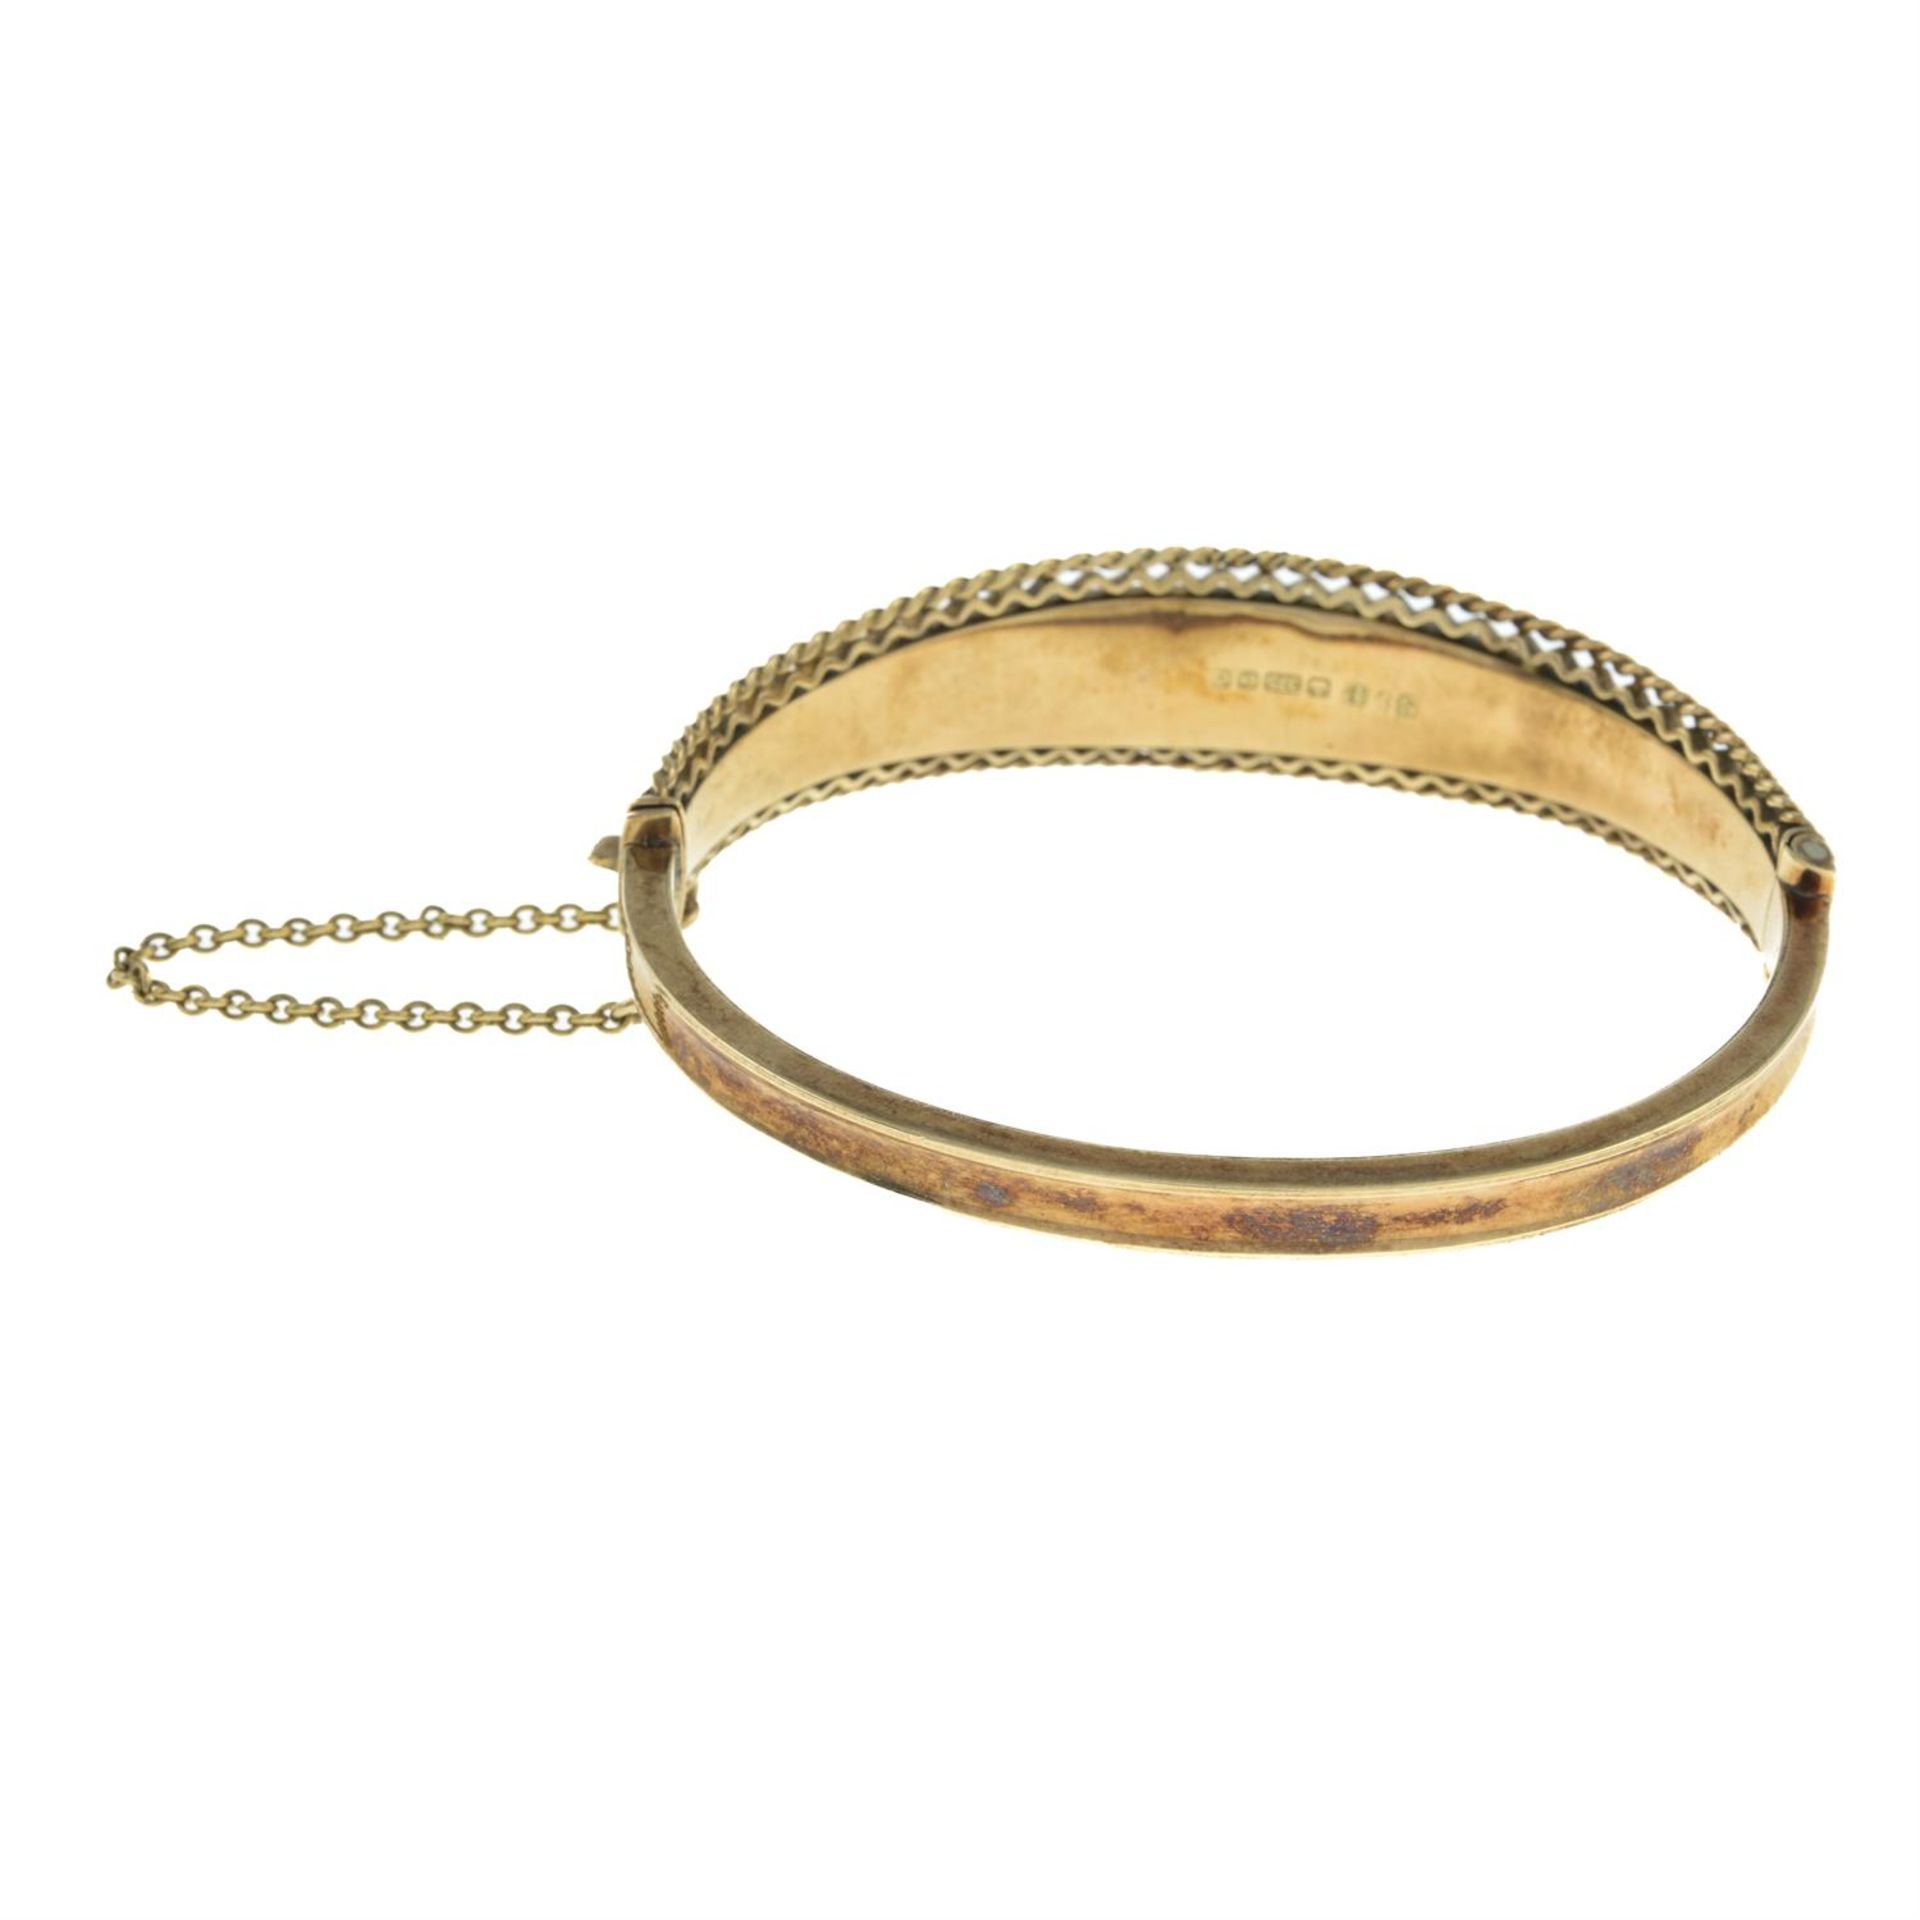 9ct gold bangle, Smith & Pepper - Image 2 of 2